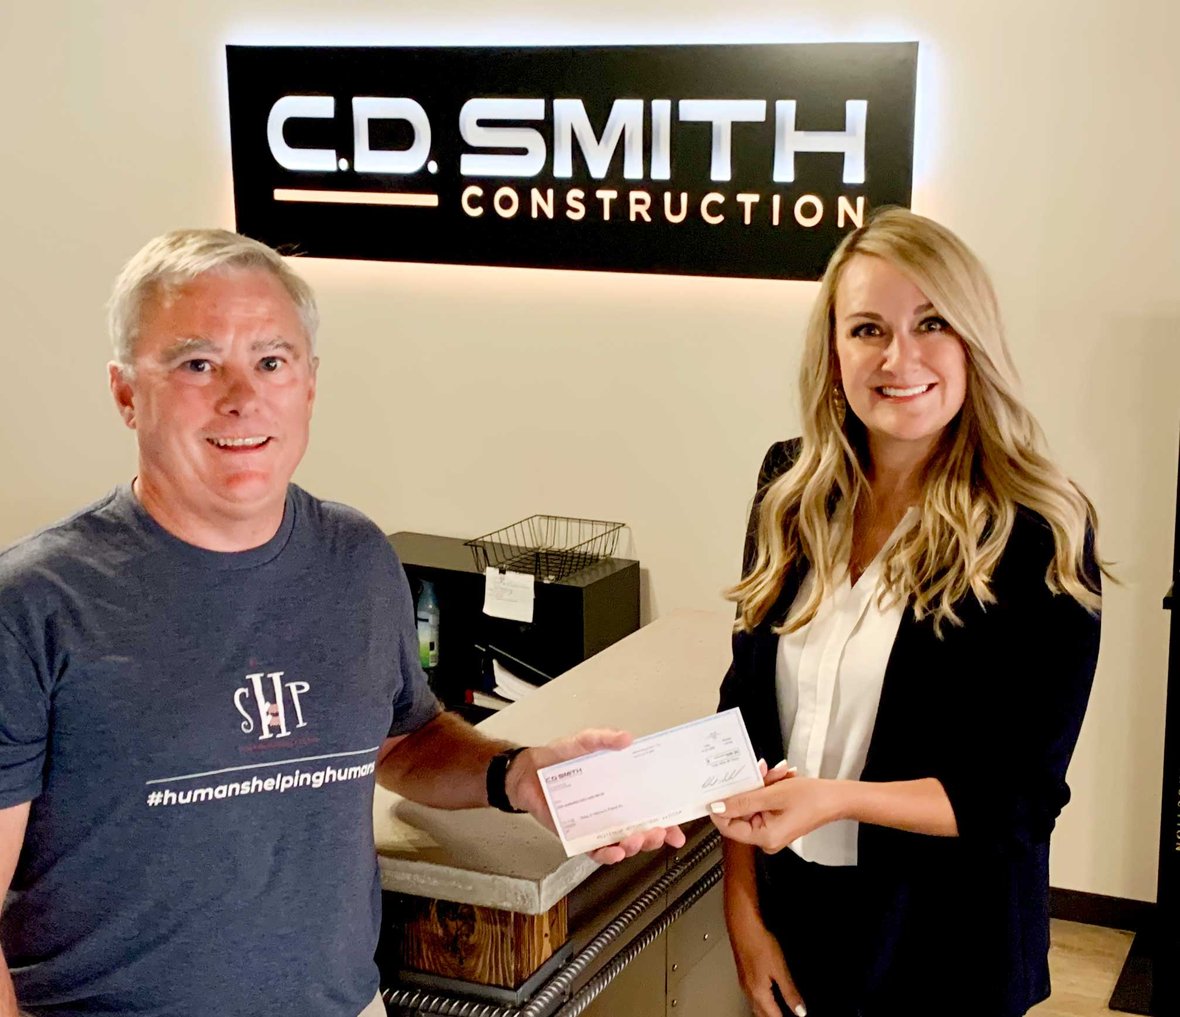 April Krahn (at right) pictured with SHP WI-Waukesha Chapter Co-President Tim Culhane at C.D. Smith Construction's Milwaukee Office